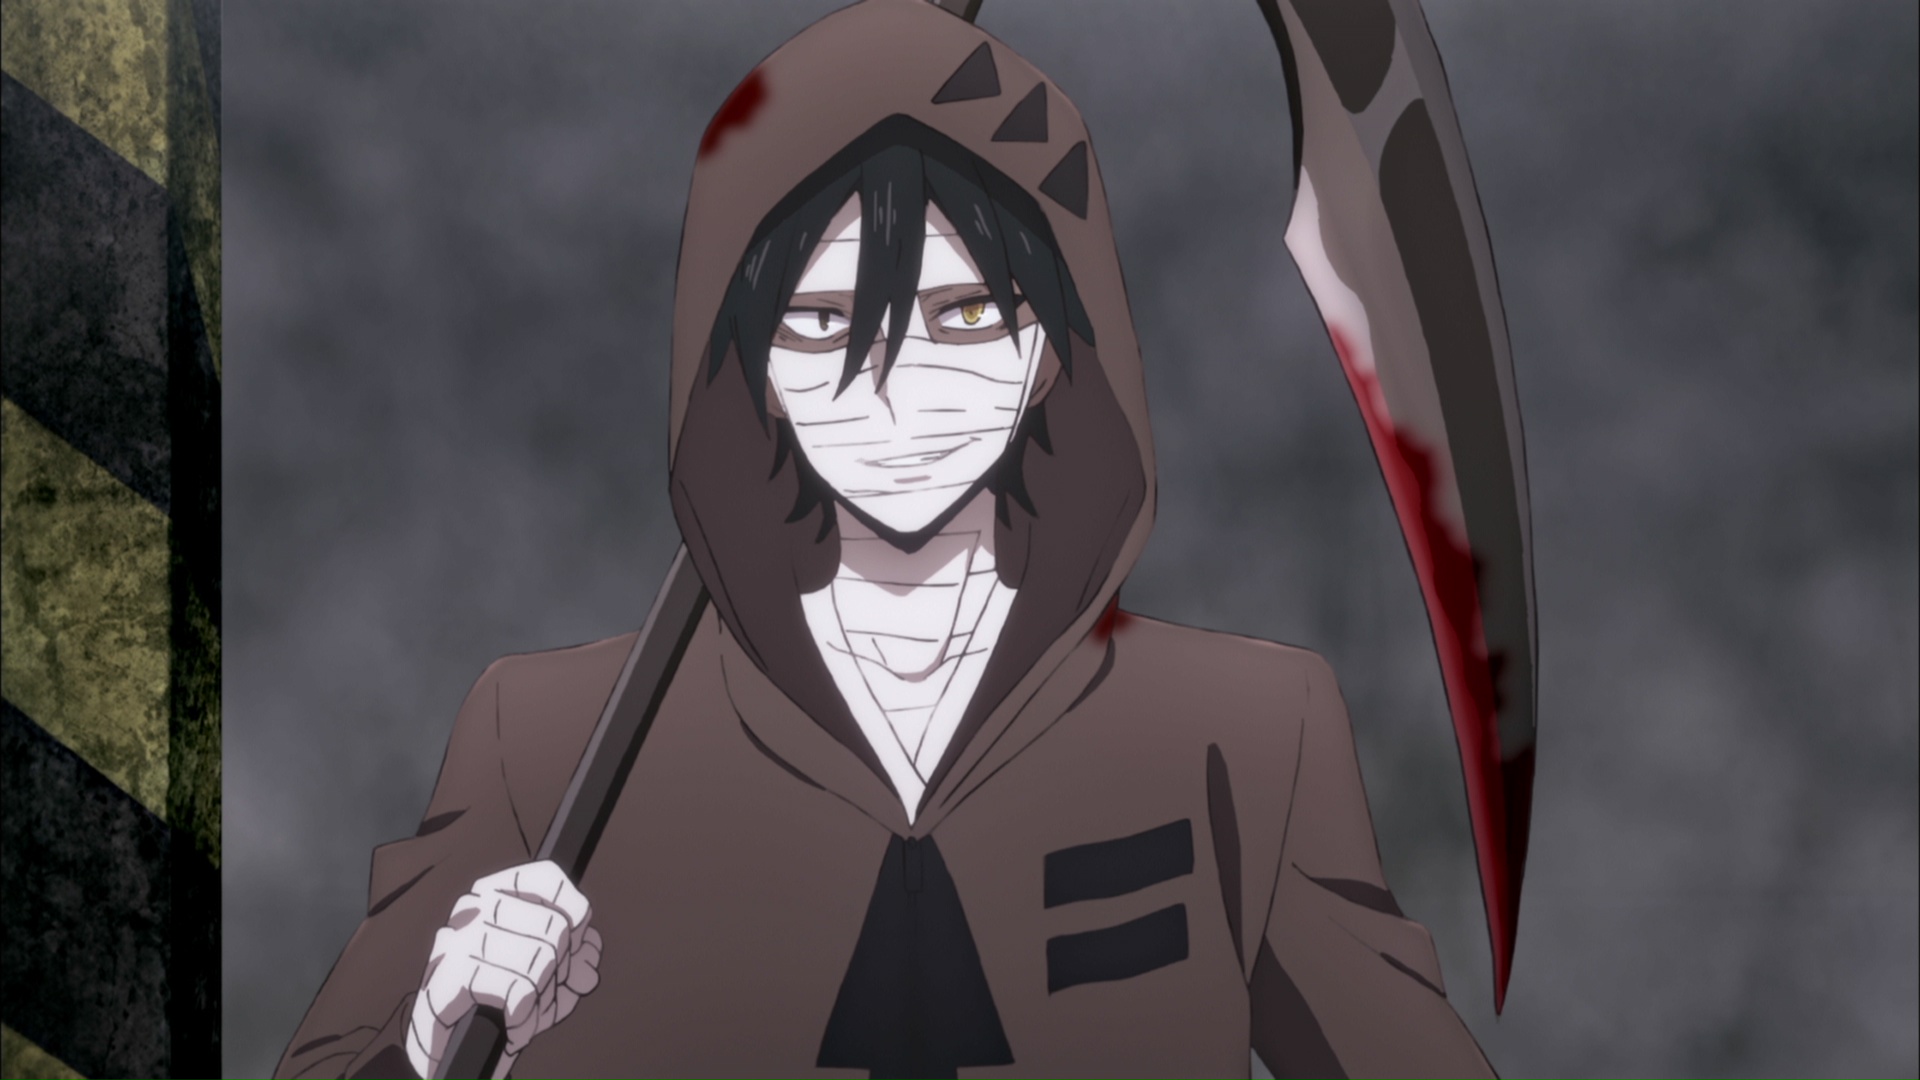 Angels Of Death: 10 Things Anime-Only Fans Don't Know About Zack